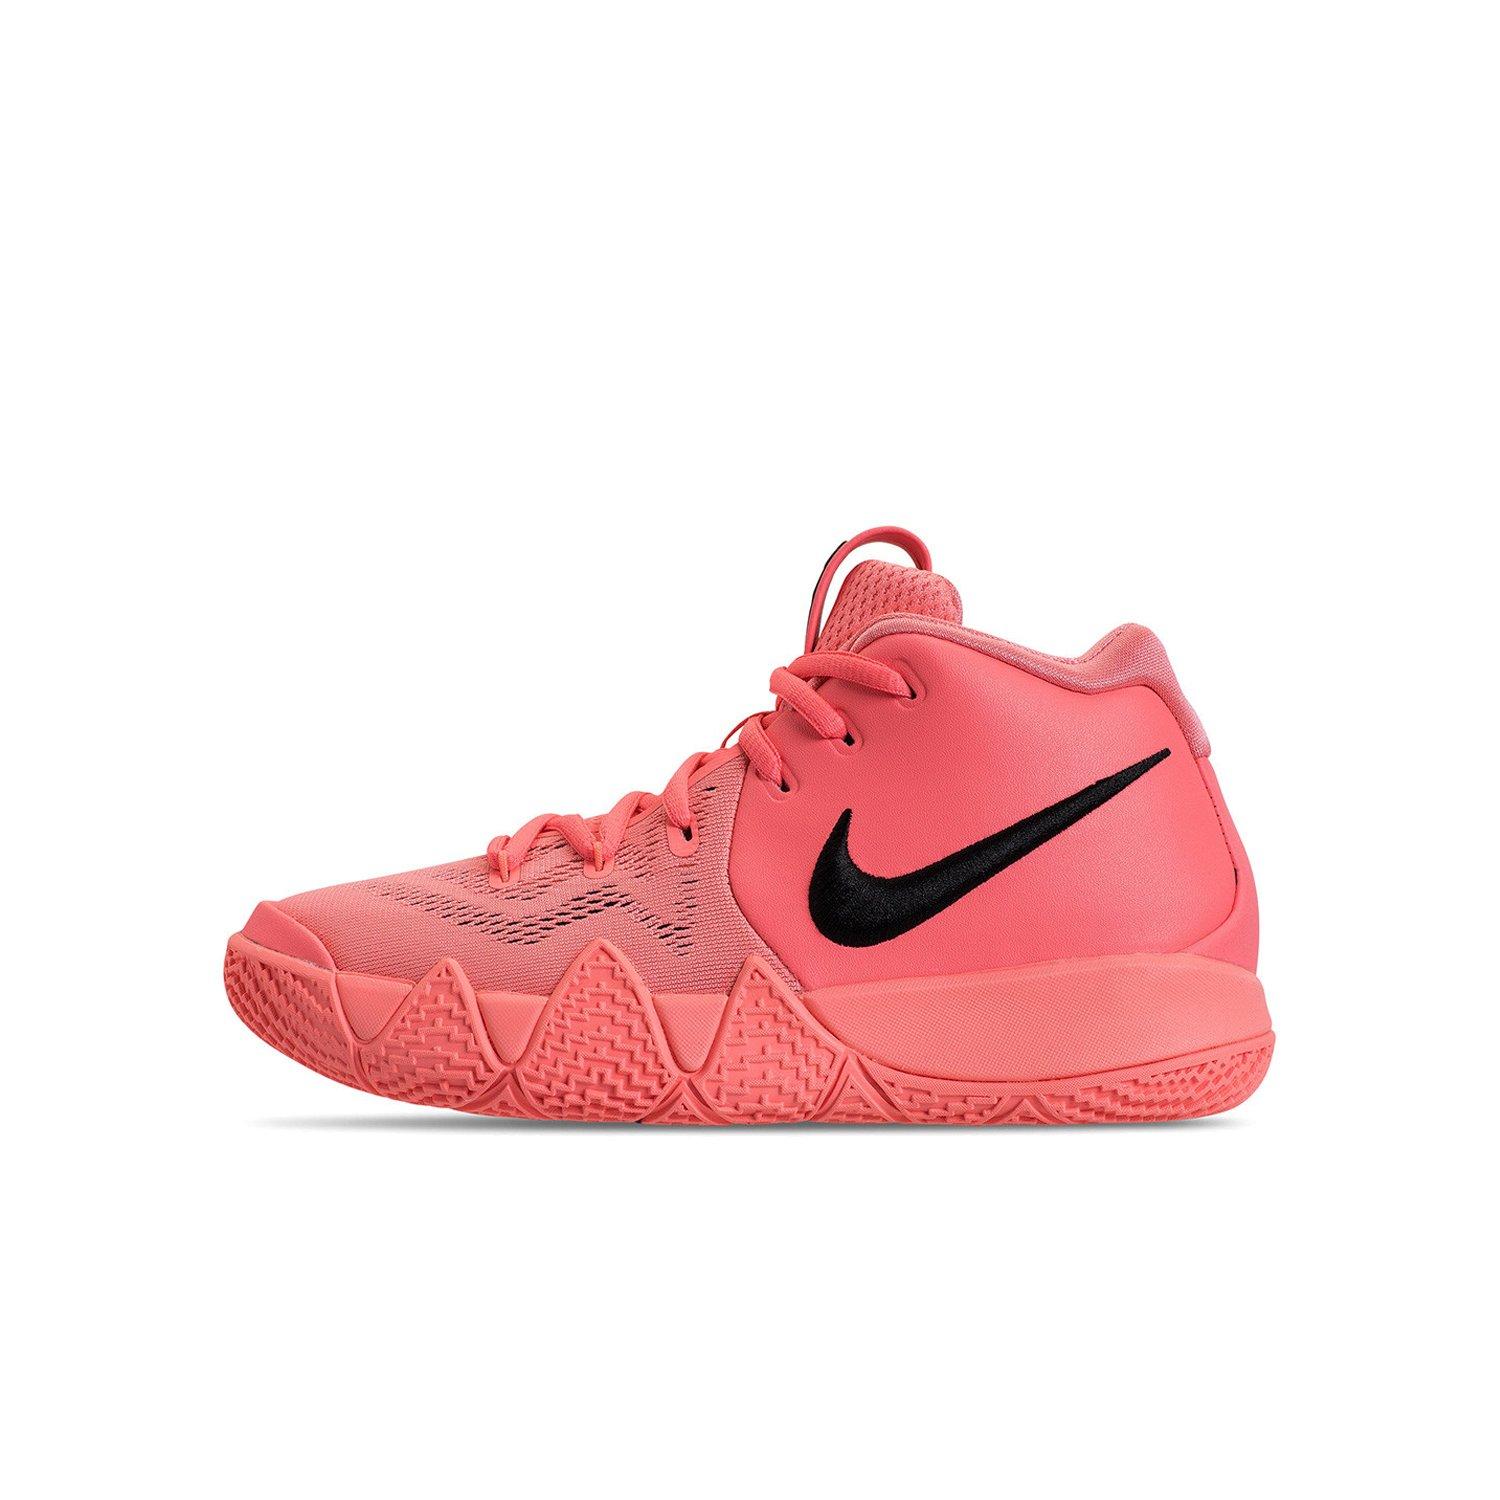 pink kyrie 4